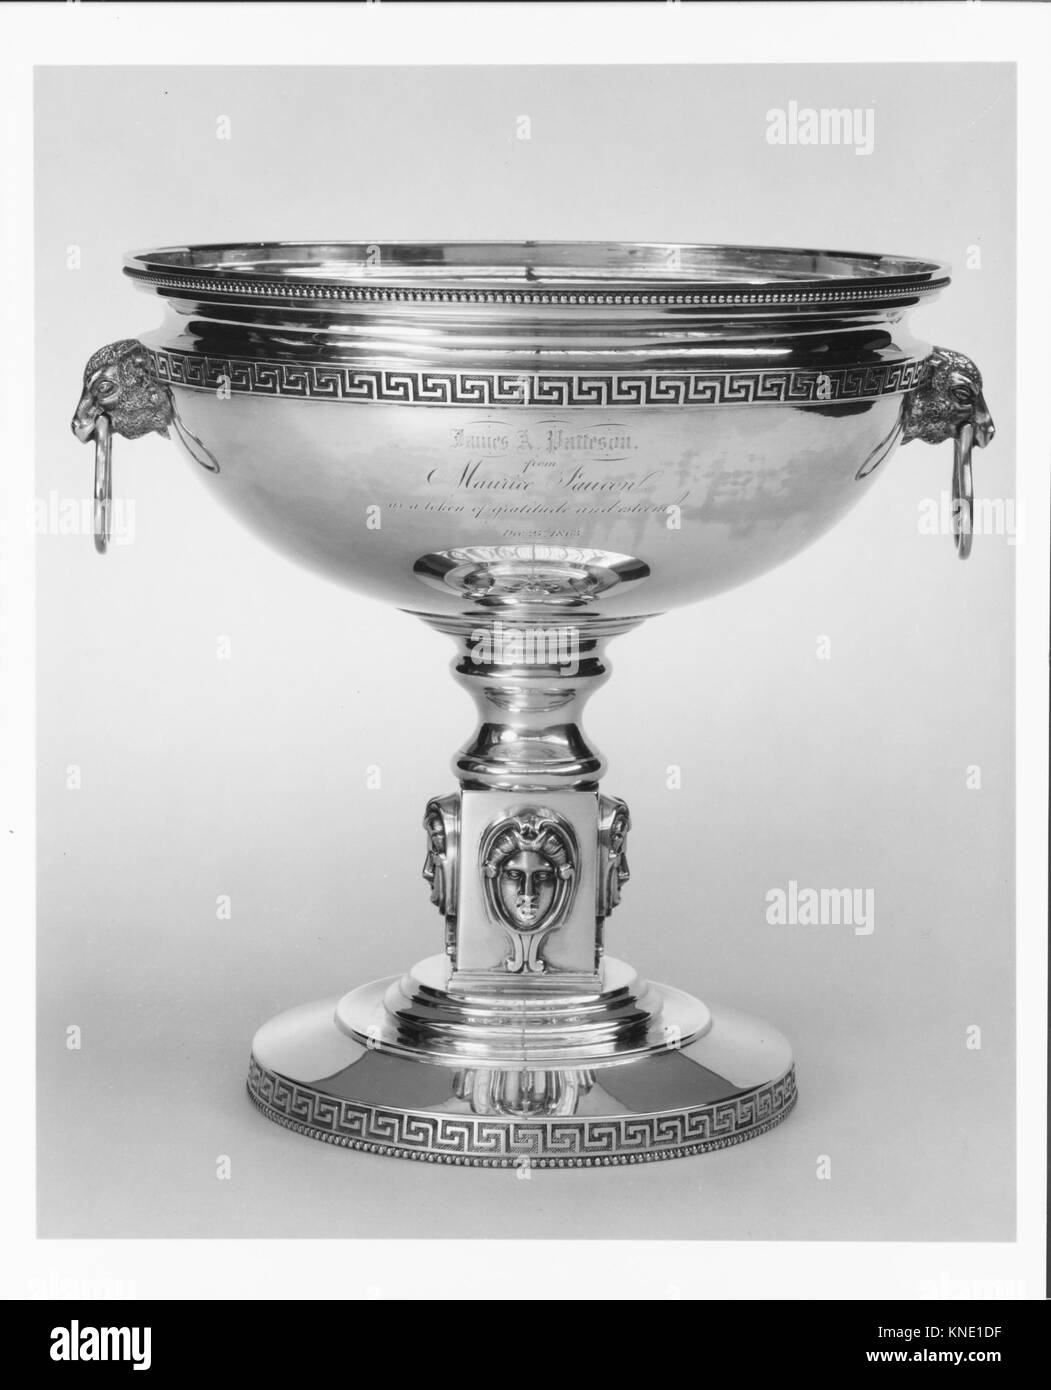 Compote MET 190431 2217 Maker: William Gale and Son, active ca. 1850?58 and 1863?66, Compote, ca. 1860, Silver, Overall: 9 1/2 x 10 7/16 in. (24.1 x 26.5 cm); 40 oz. 1 dwt. (1245.7 g) Lip: Diam. 9 3/8 in. (23.8 cm) Foot: Diam. 6 1/4 in. (15.9 cm). The Metropolitan Museum of Art, New York. Purchase, Anonymous Gift, 1968 (68.114) Stock Photo